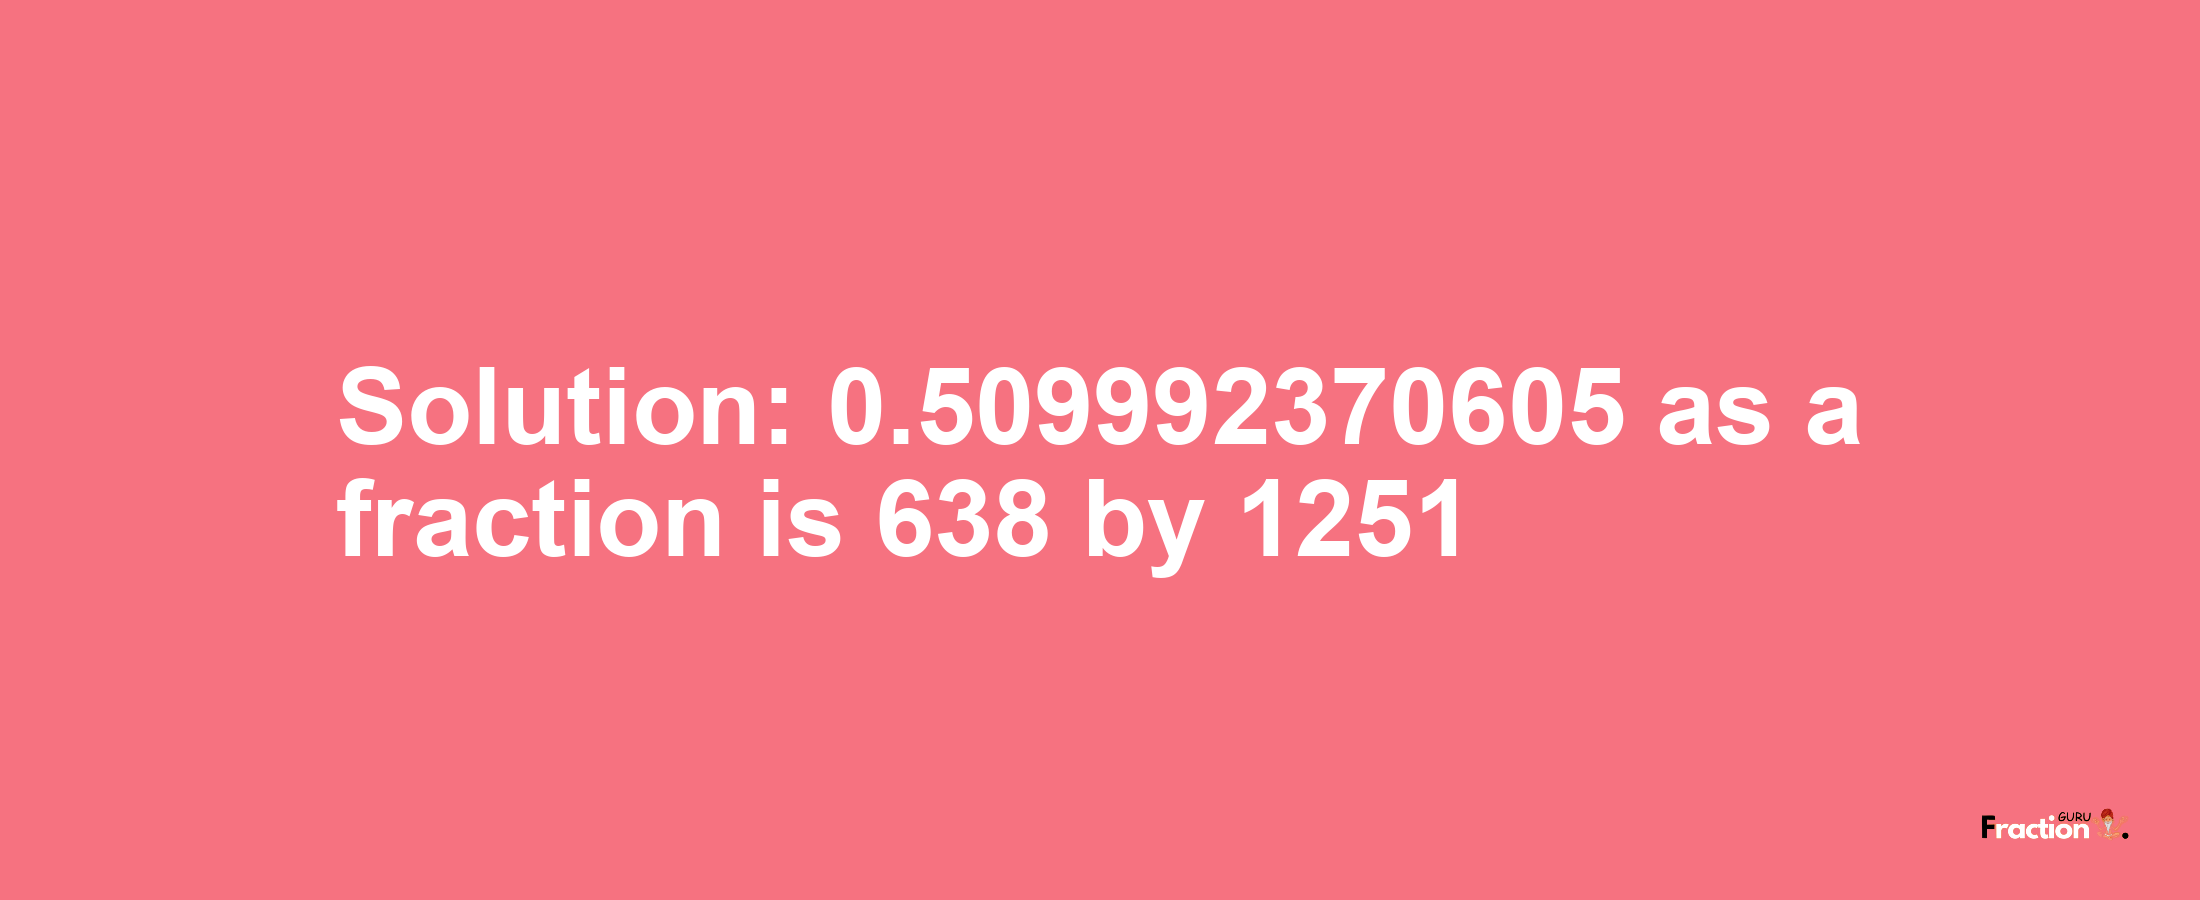 Solution:0.509992370605 as a fraction is 638/1251